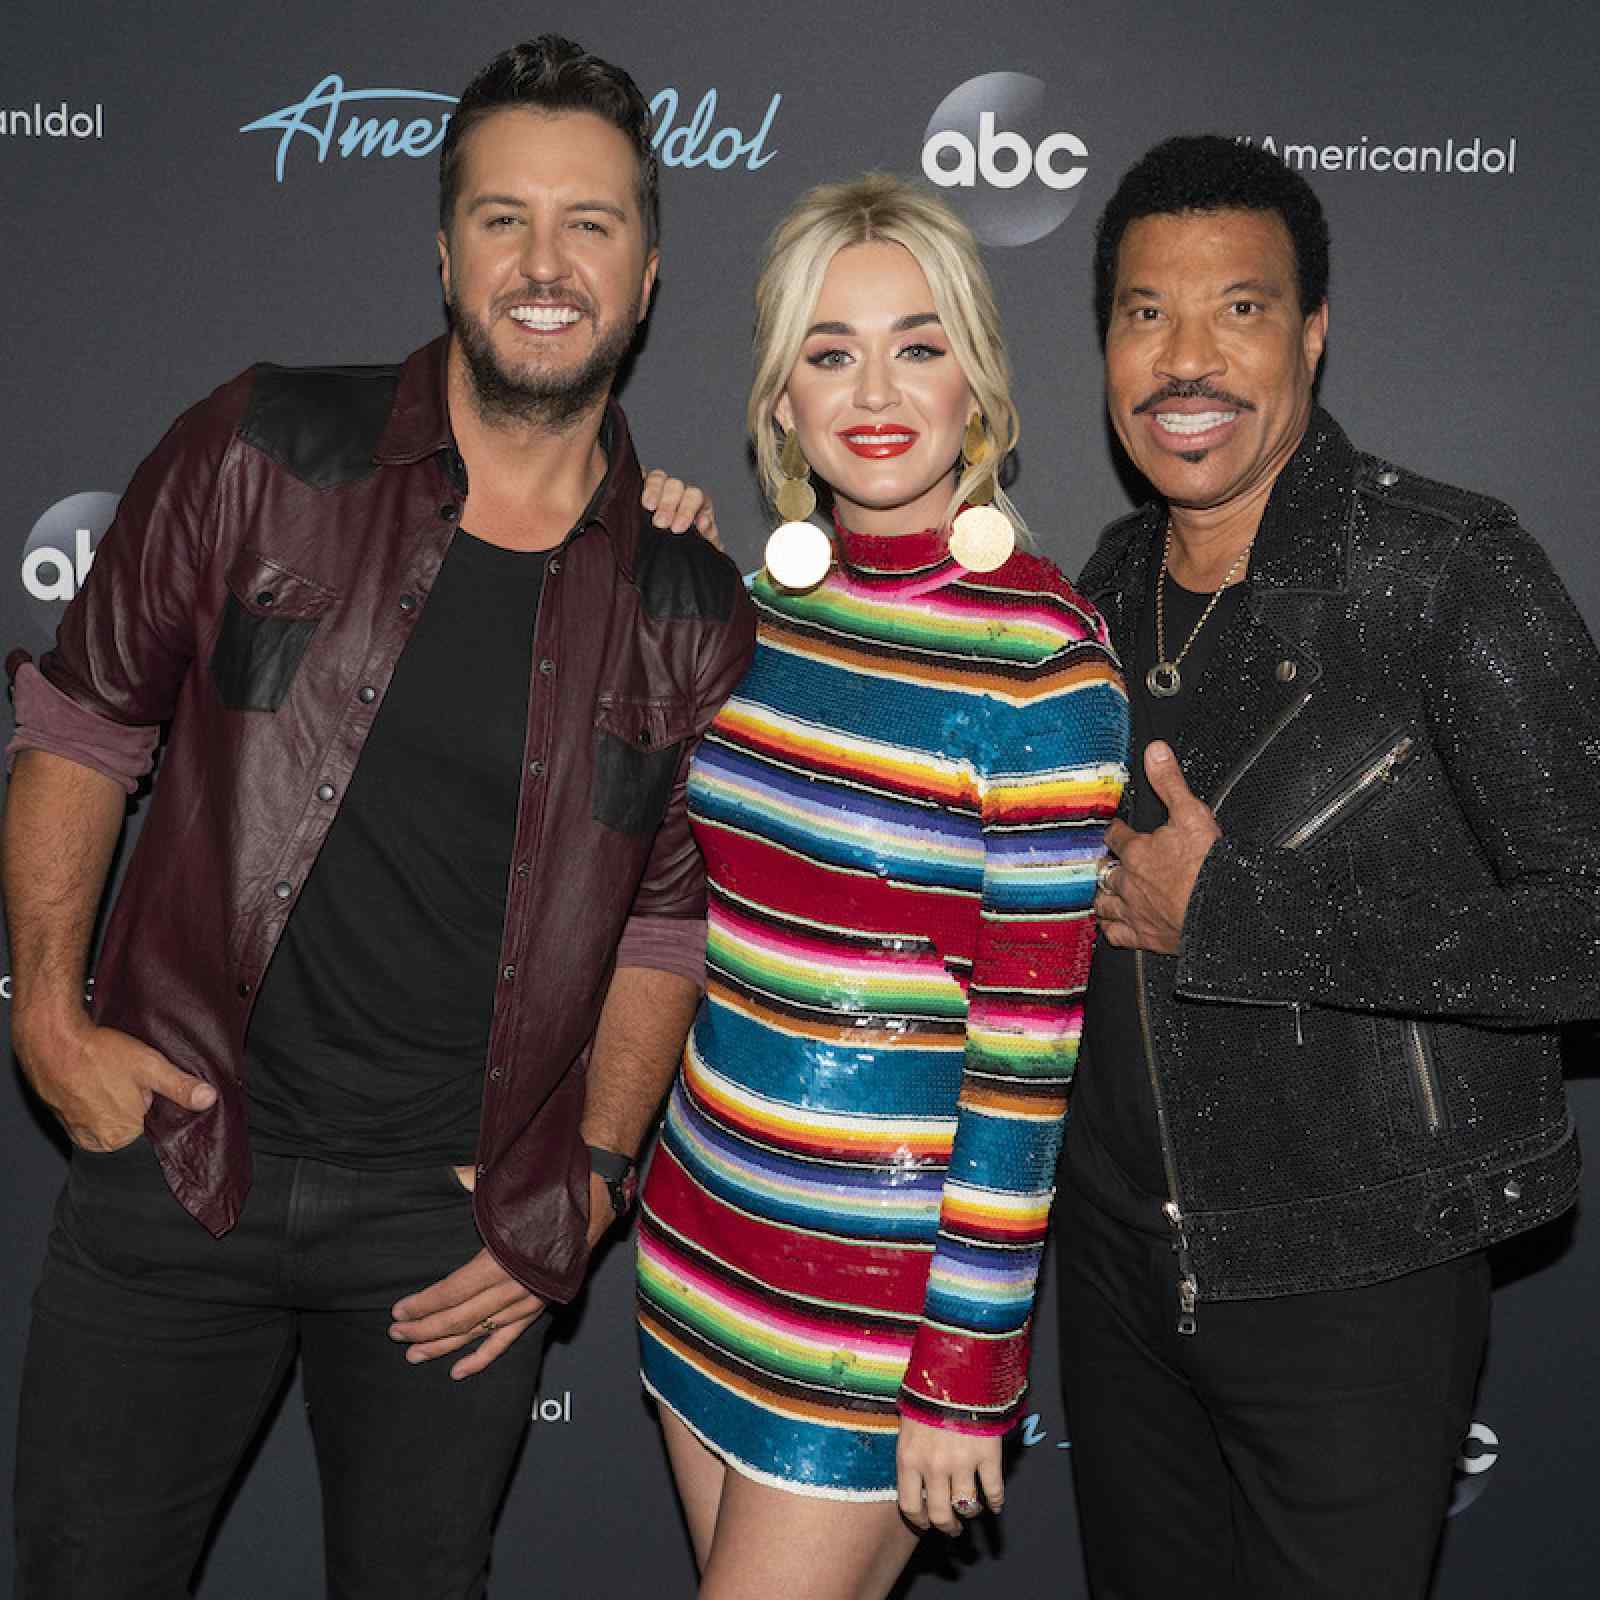 Luke to Perform on American Idol Finale this Sunday, May 19